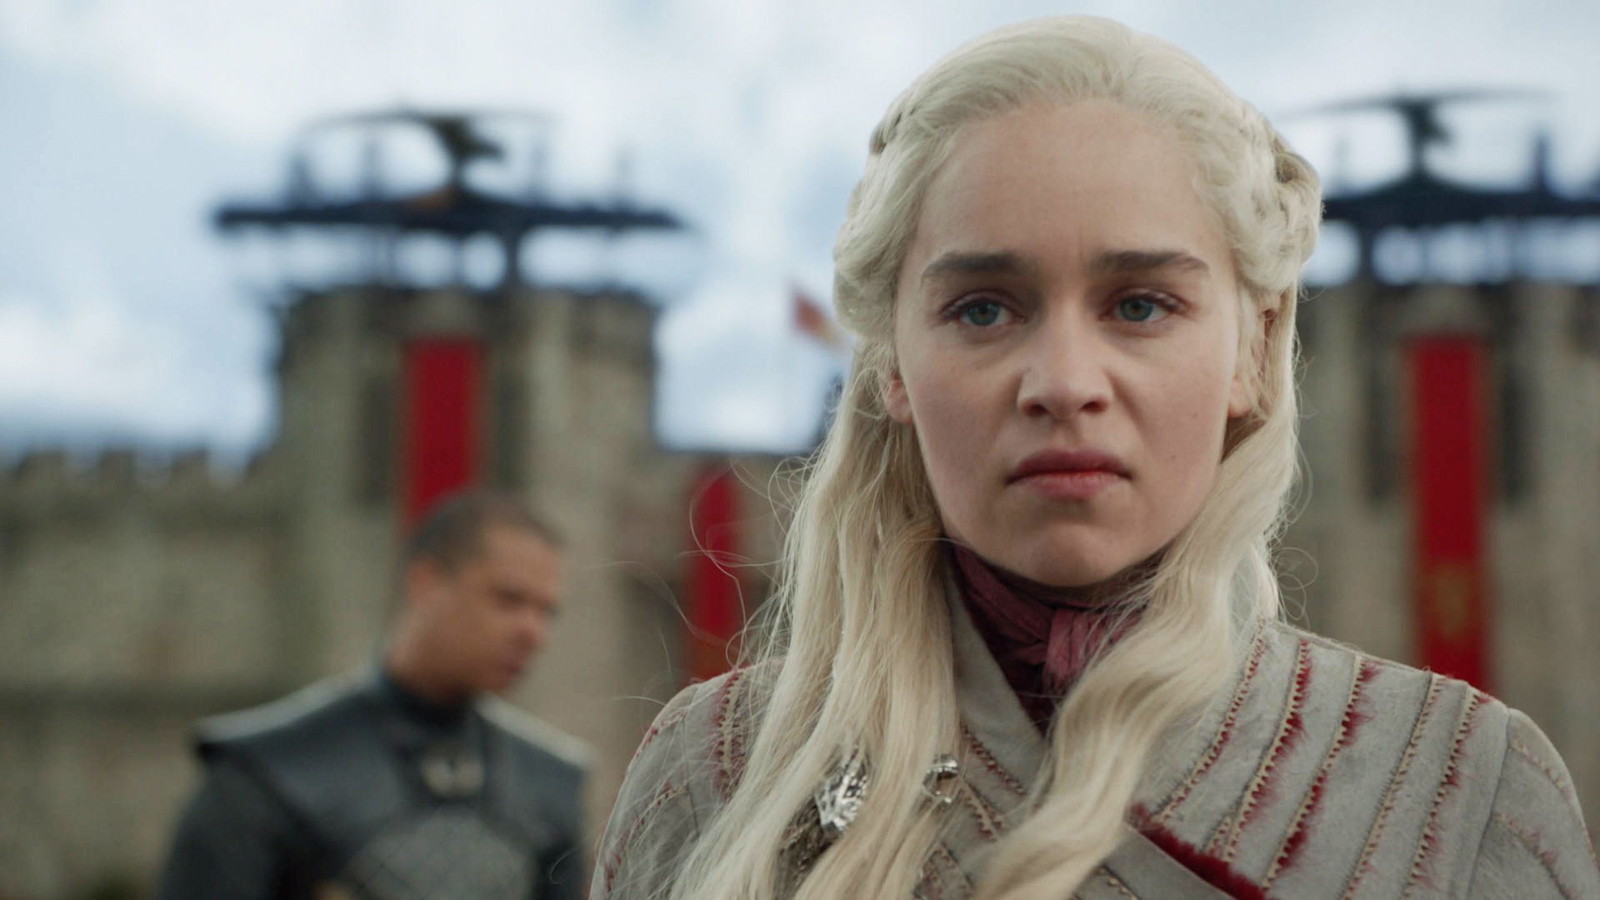 Daenerys Targaryen became Emilia Clarke's breakout role which brought her worldwide fame | HBO